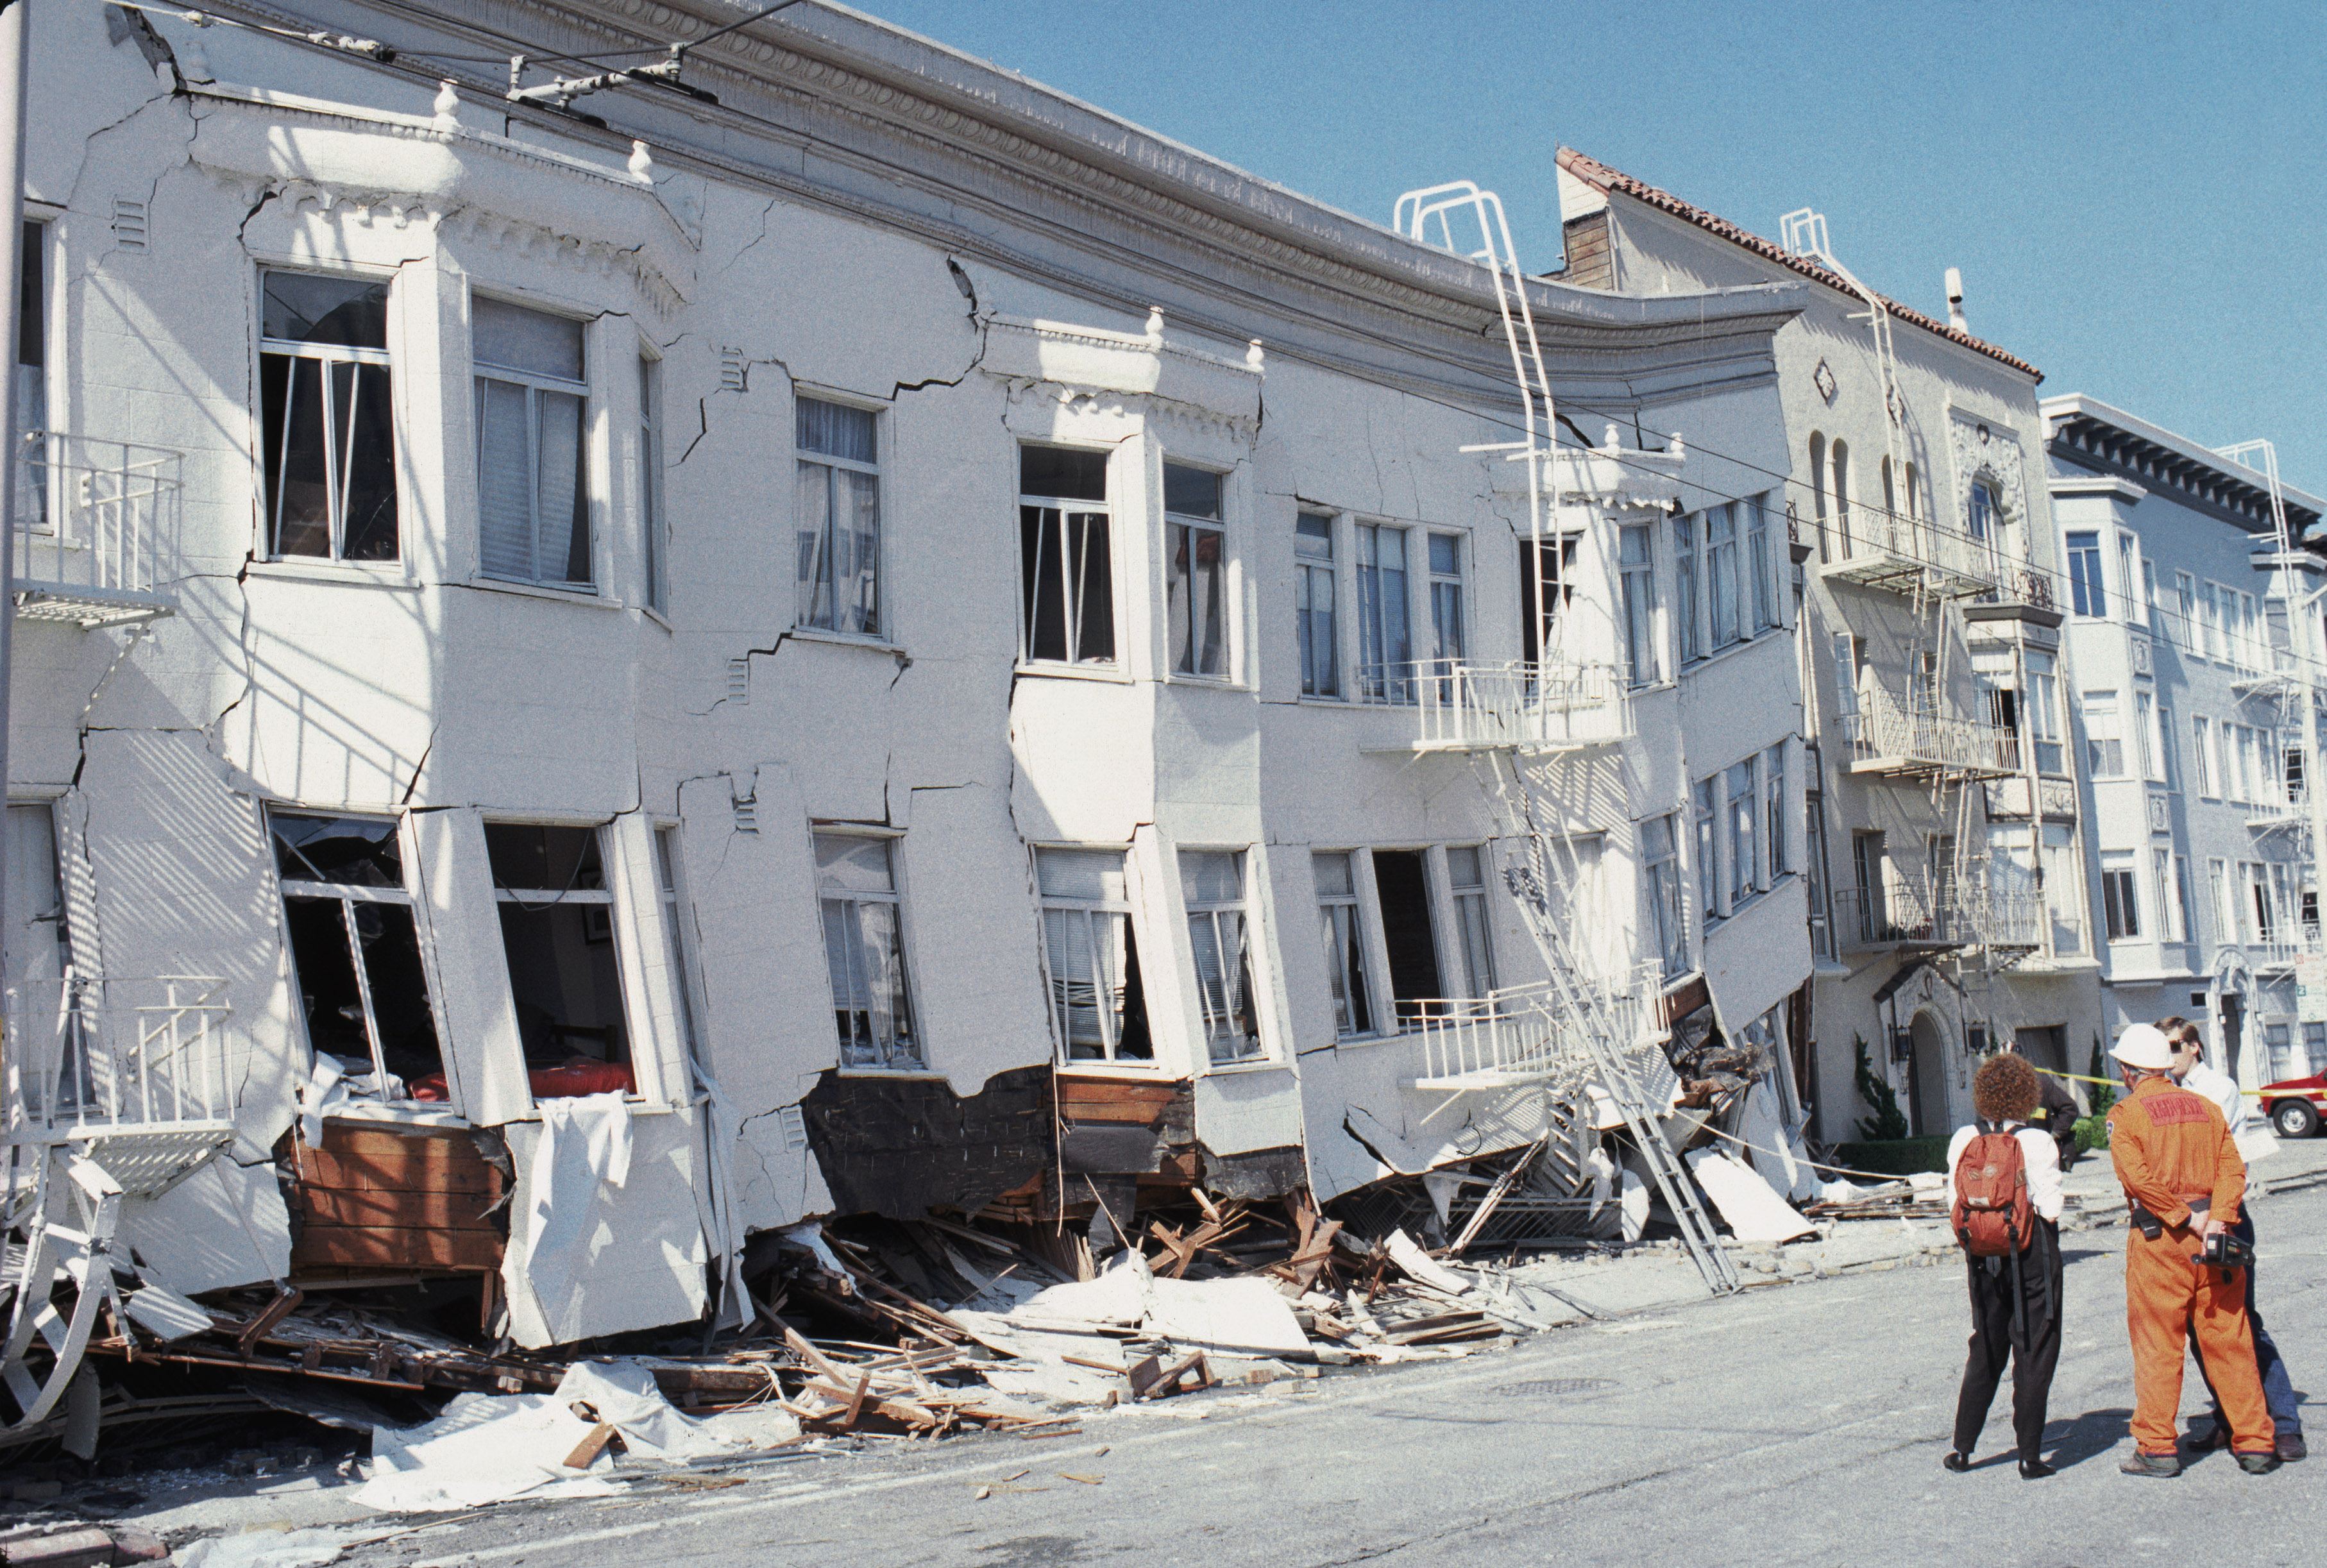 The Marina district disaster zone after an earthquake, measuring 7.1 on the richter scale on Oct. 17, 1989 in San Francisco. (Otto Greule Jr—Getty Images)